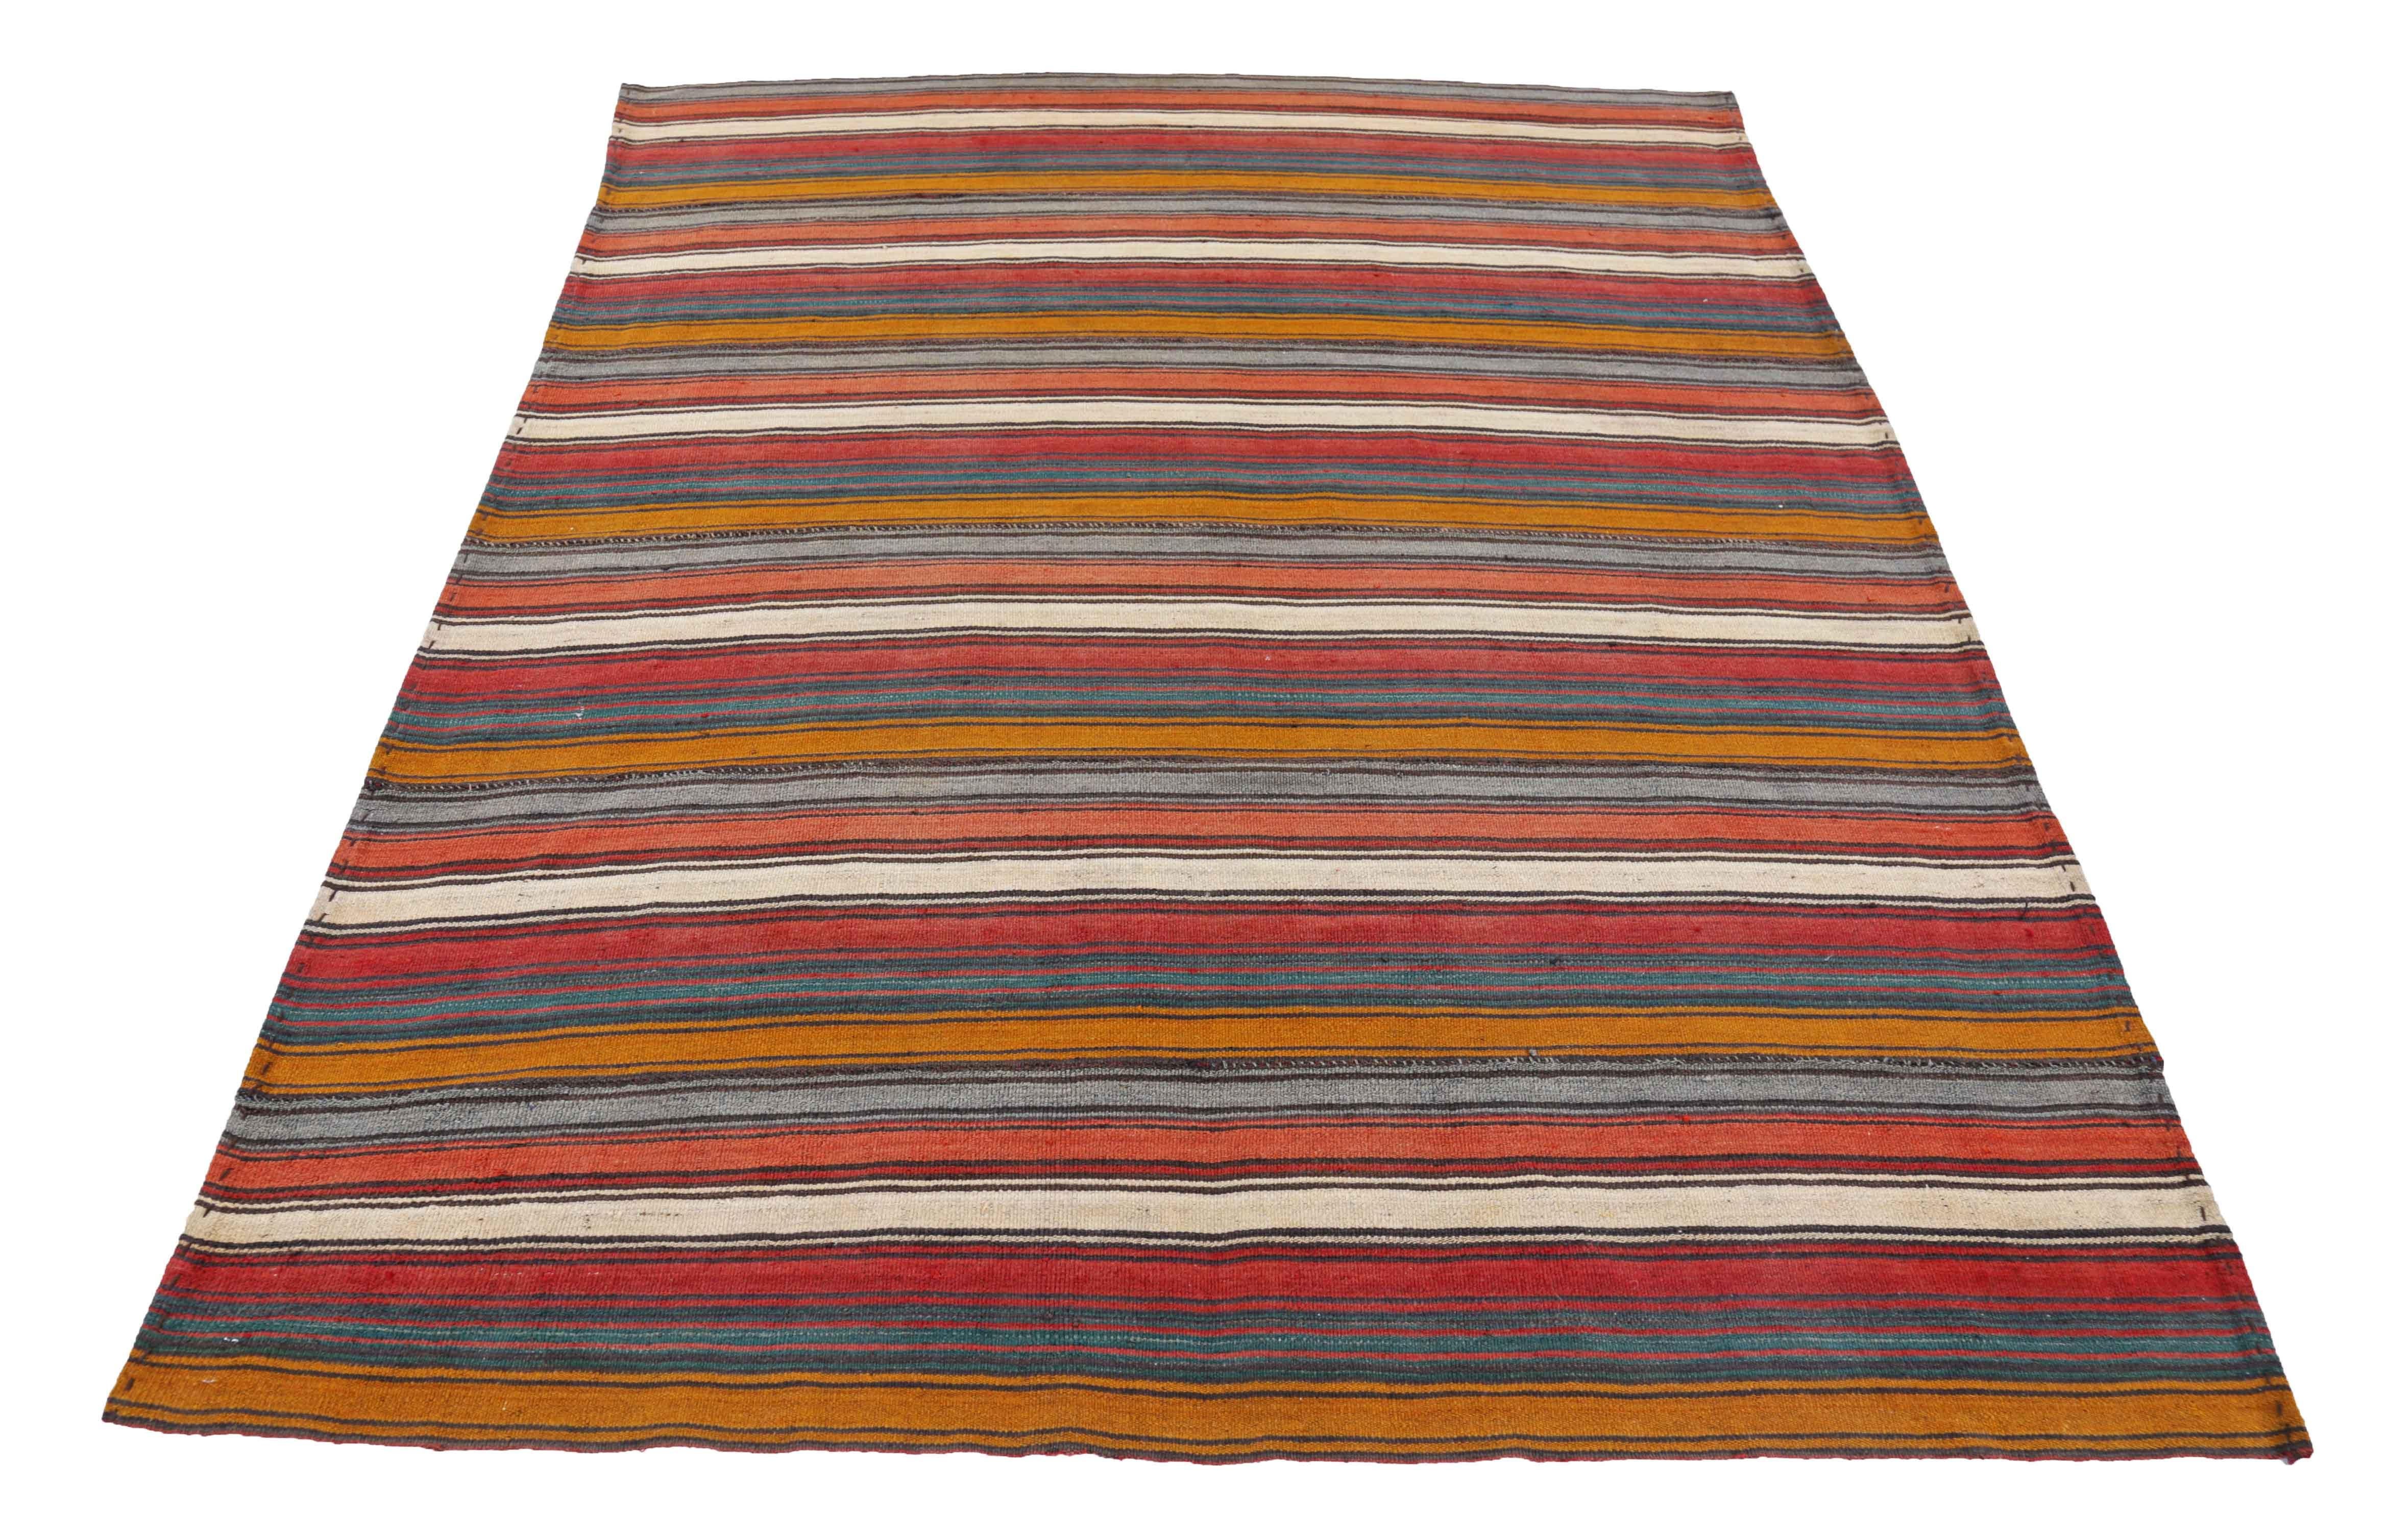 Antique Persian area rug handwoven from the finest sheep’s wool. It’s colored with all-natural vegetable dyes that are safe for humans and pets. It’s a traditional Jajm design handwoven by expert artisans. It’s a lovely area rug that can be